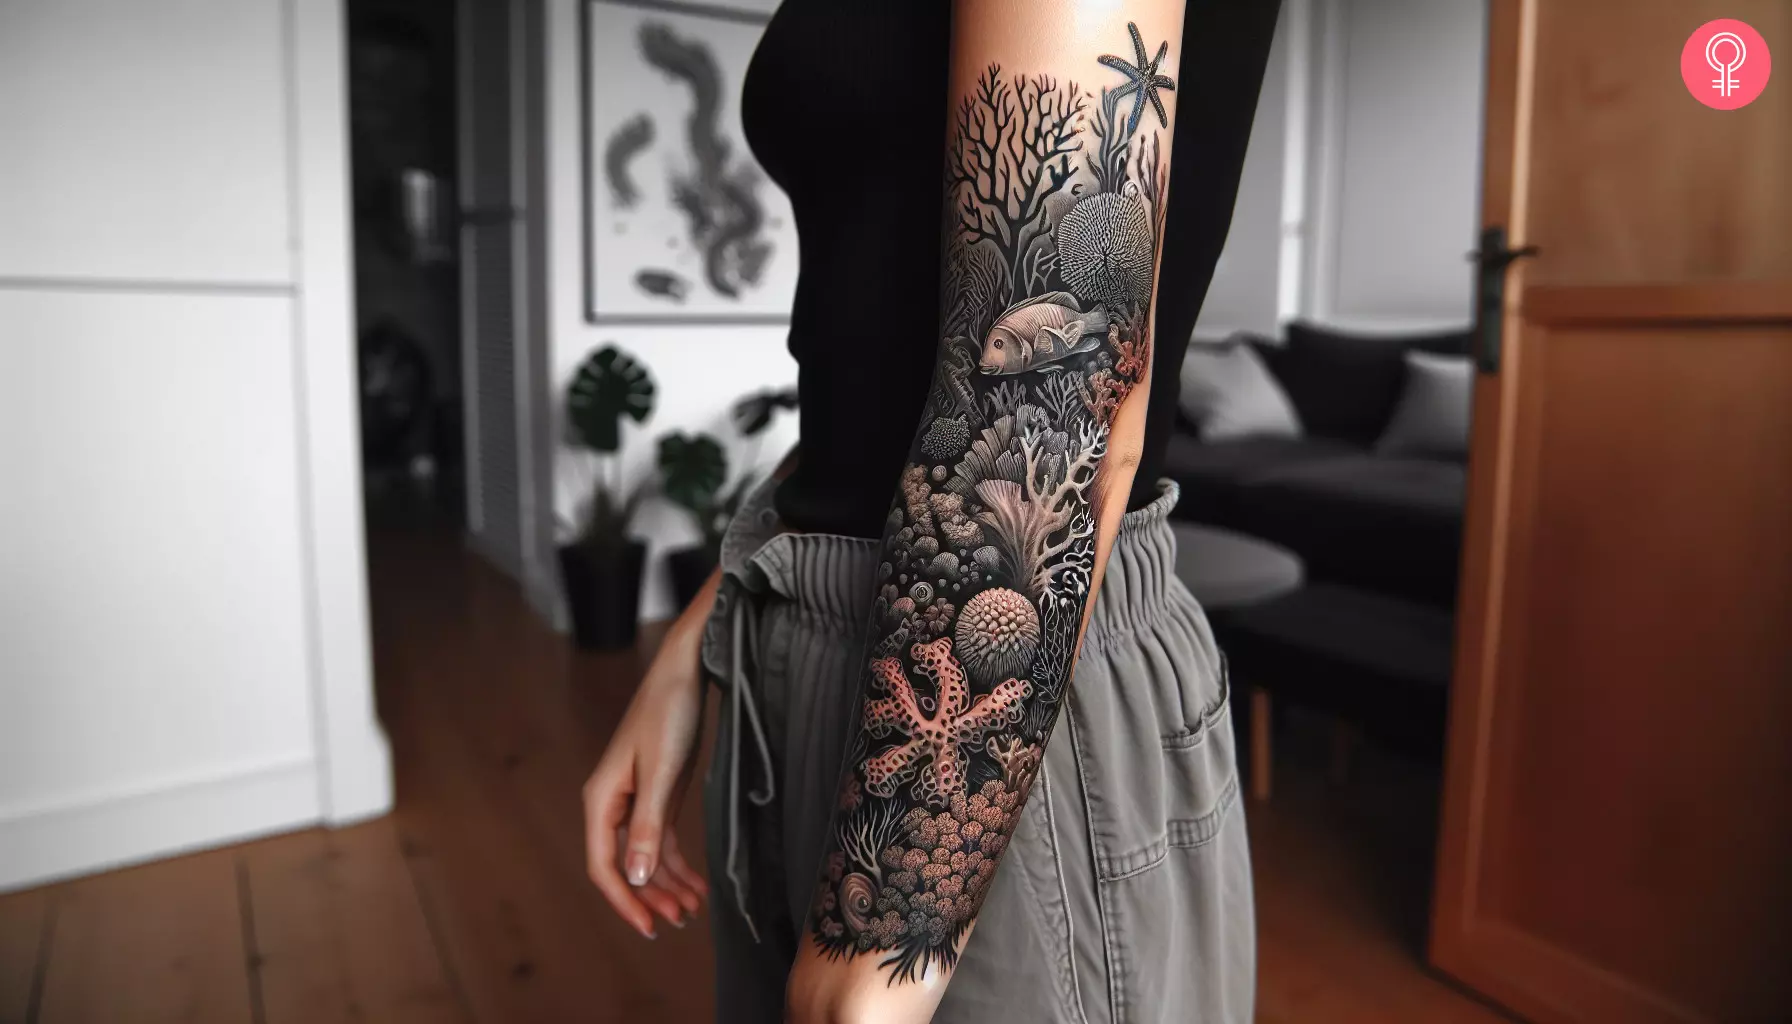 A woman with a black coral reef tattoo on her arm